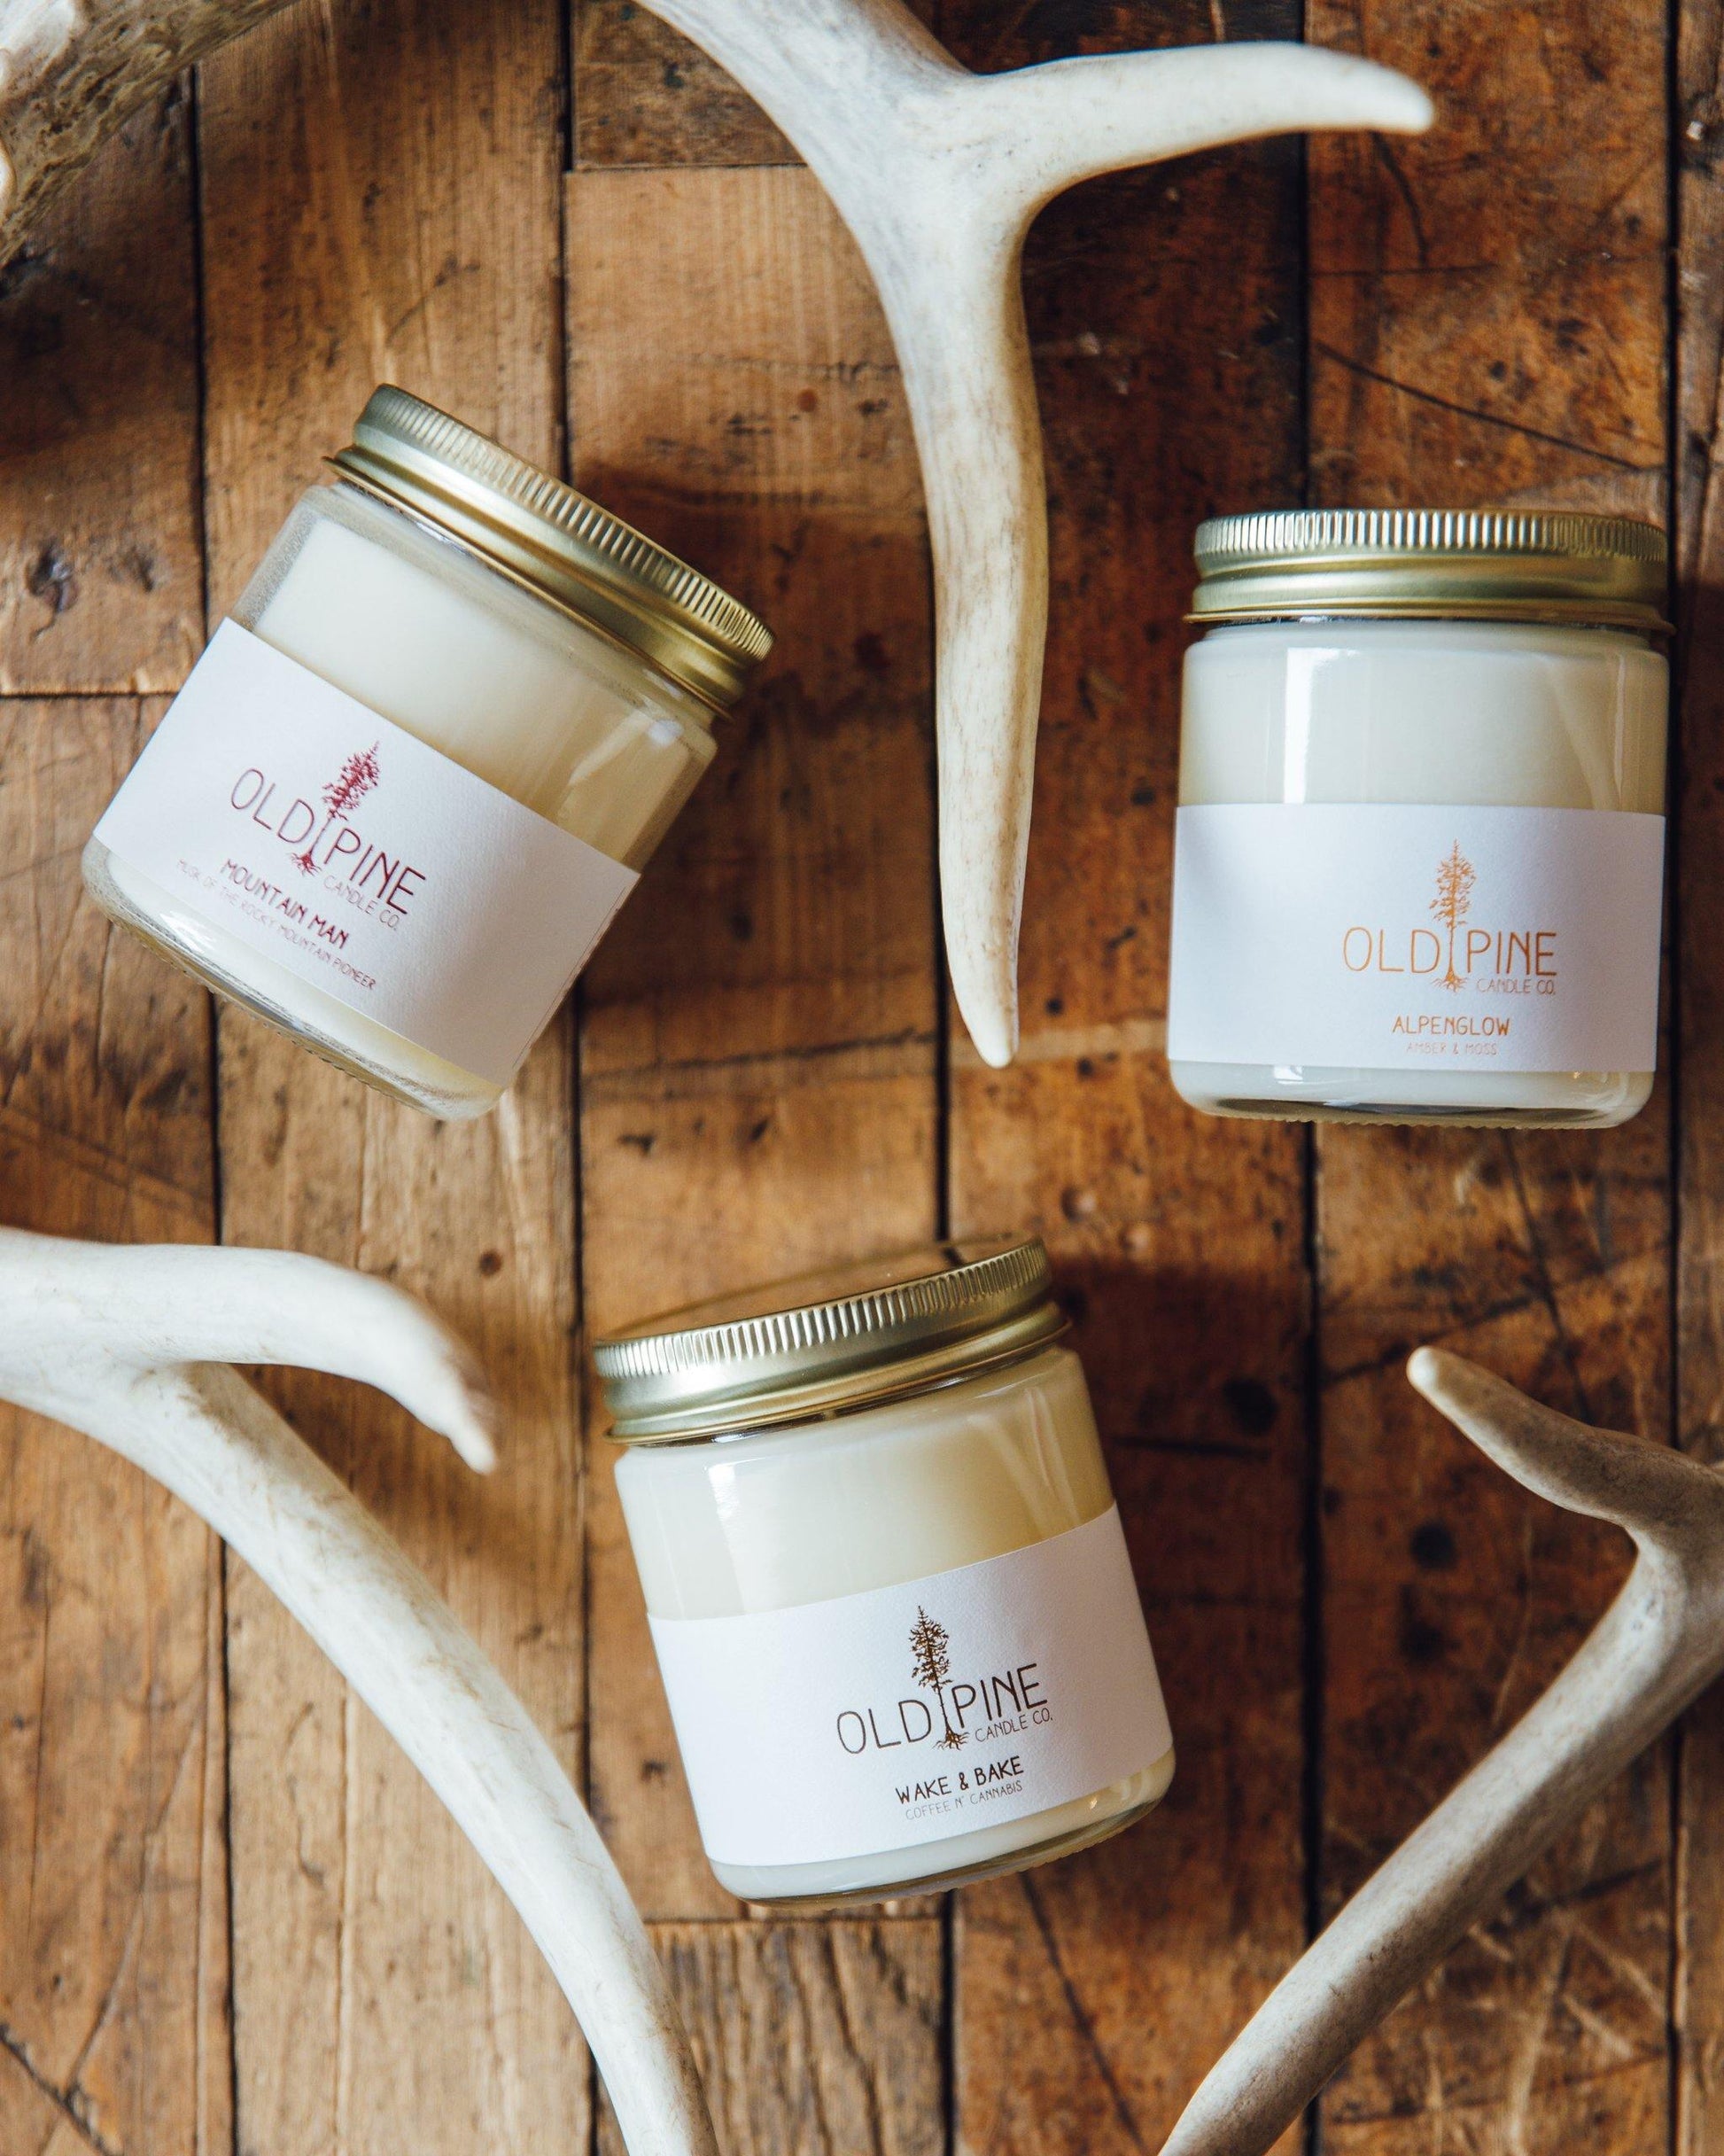 Rustic Old Pine soy candles with Antlers